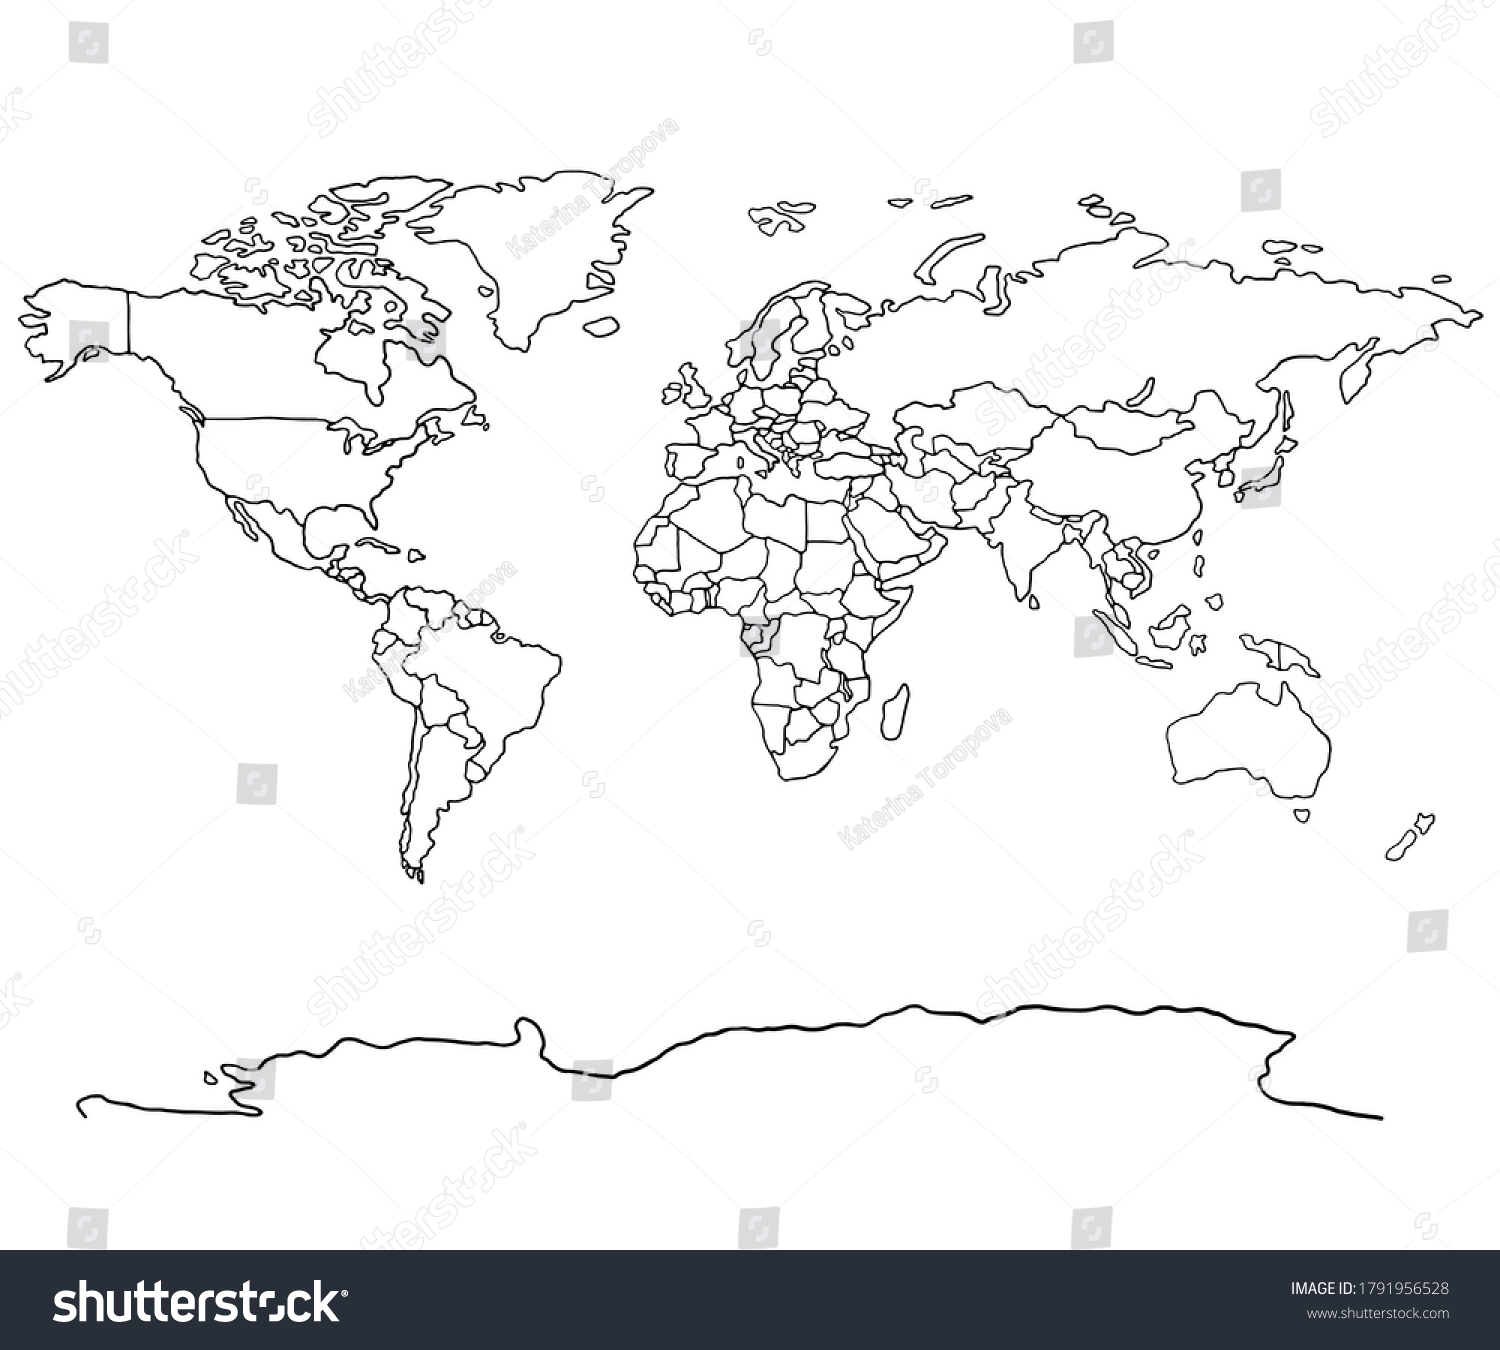 Coloring Book World Map Vector Illustration Stock Vector (Royalty Free ...